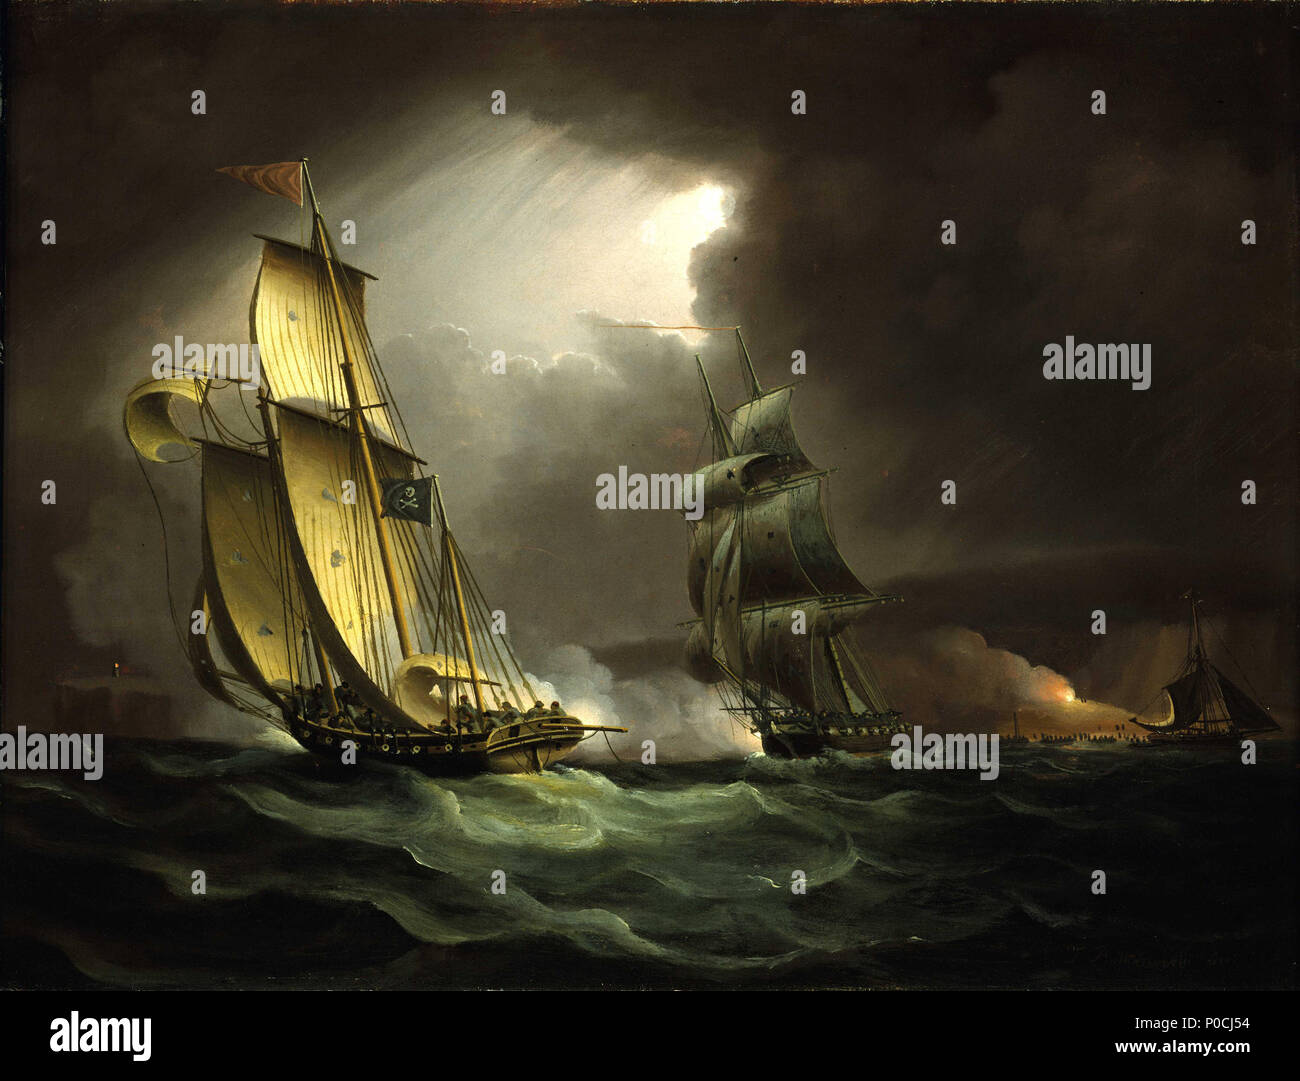 .  English: A Smuggling Lugger Chased by a Naval Brig This seascape of a smuggler being chased by a brig at night uses established theatrical means to create a sensation of adventure for the viewer. Across dark waves, which are lit dramatically out of tempestuous clouds, a smuggler is trying to escape. In the background, topographical features – which may relate to the British Channel coast – can be seen. Here, a fire reveals further raid-related action on the beach. In the late 18th century and early 19th century a scene like this fulfilled the audience’s appetite for romantic and adventurous Stock Photo